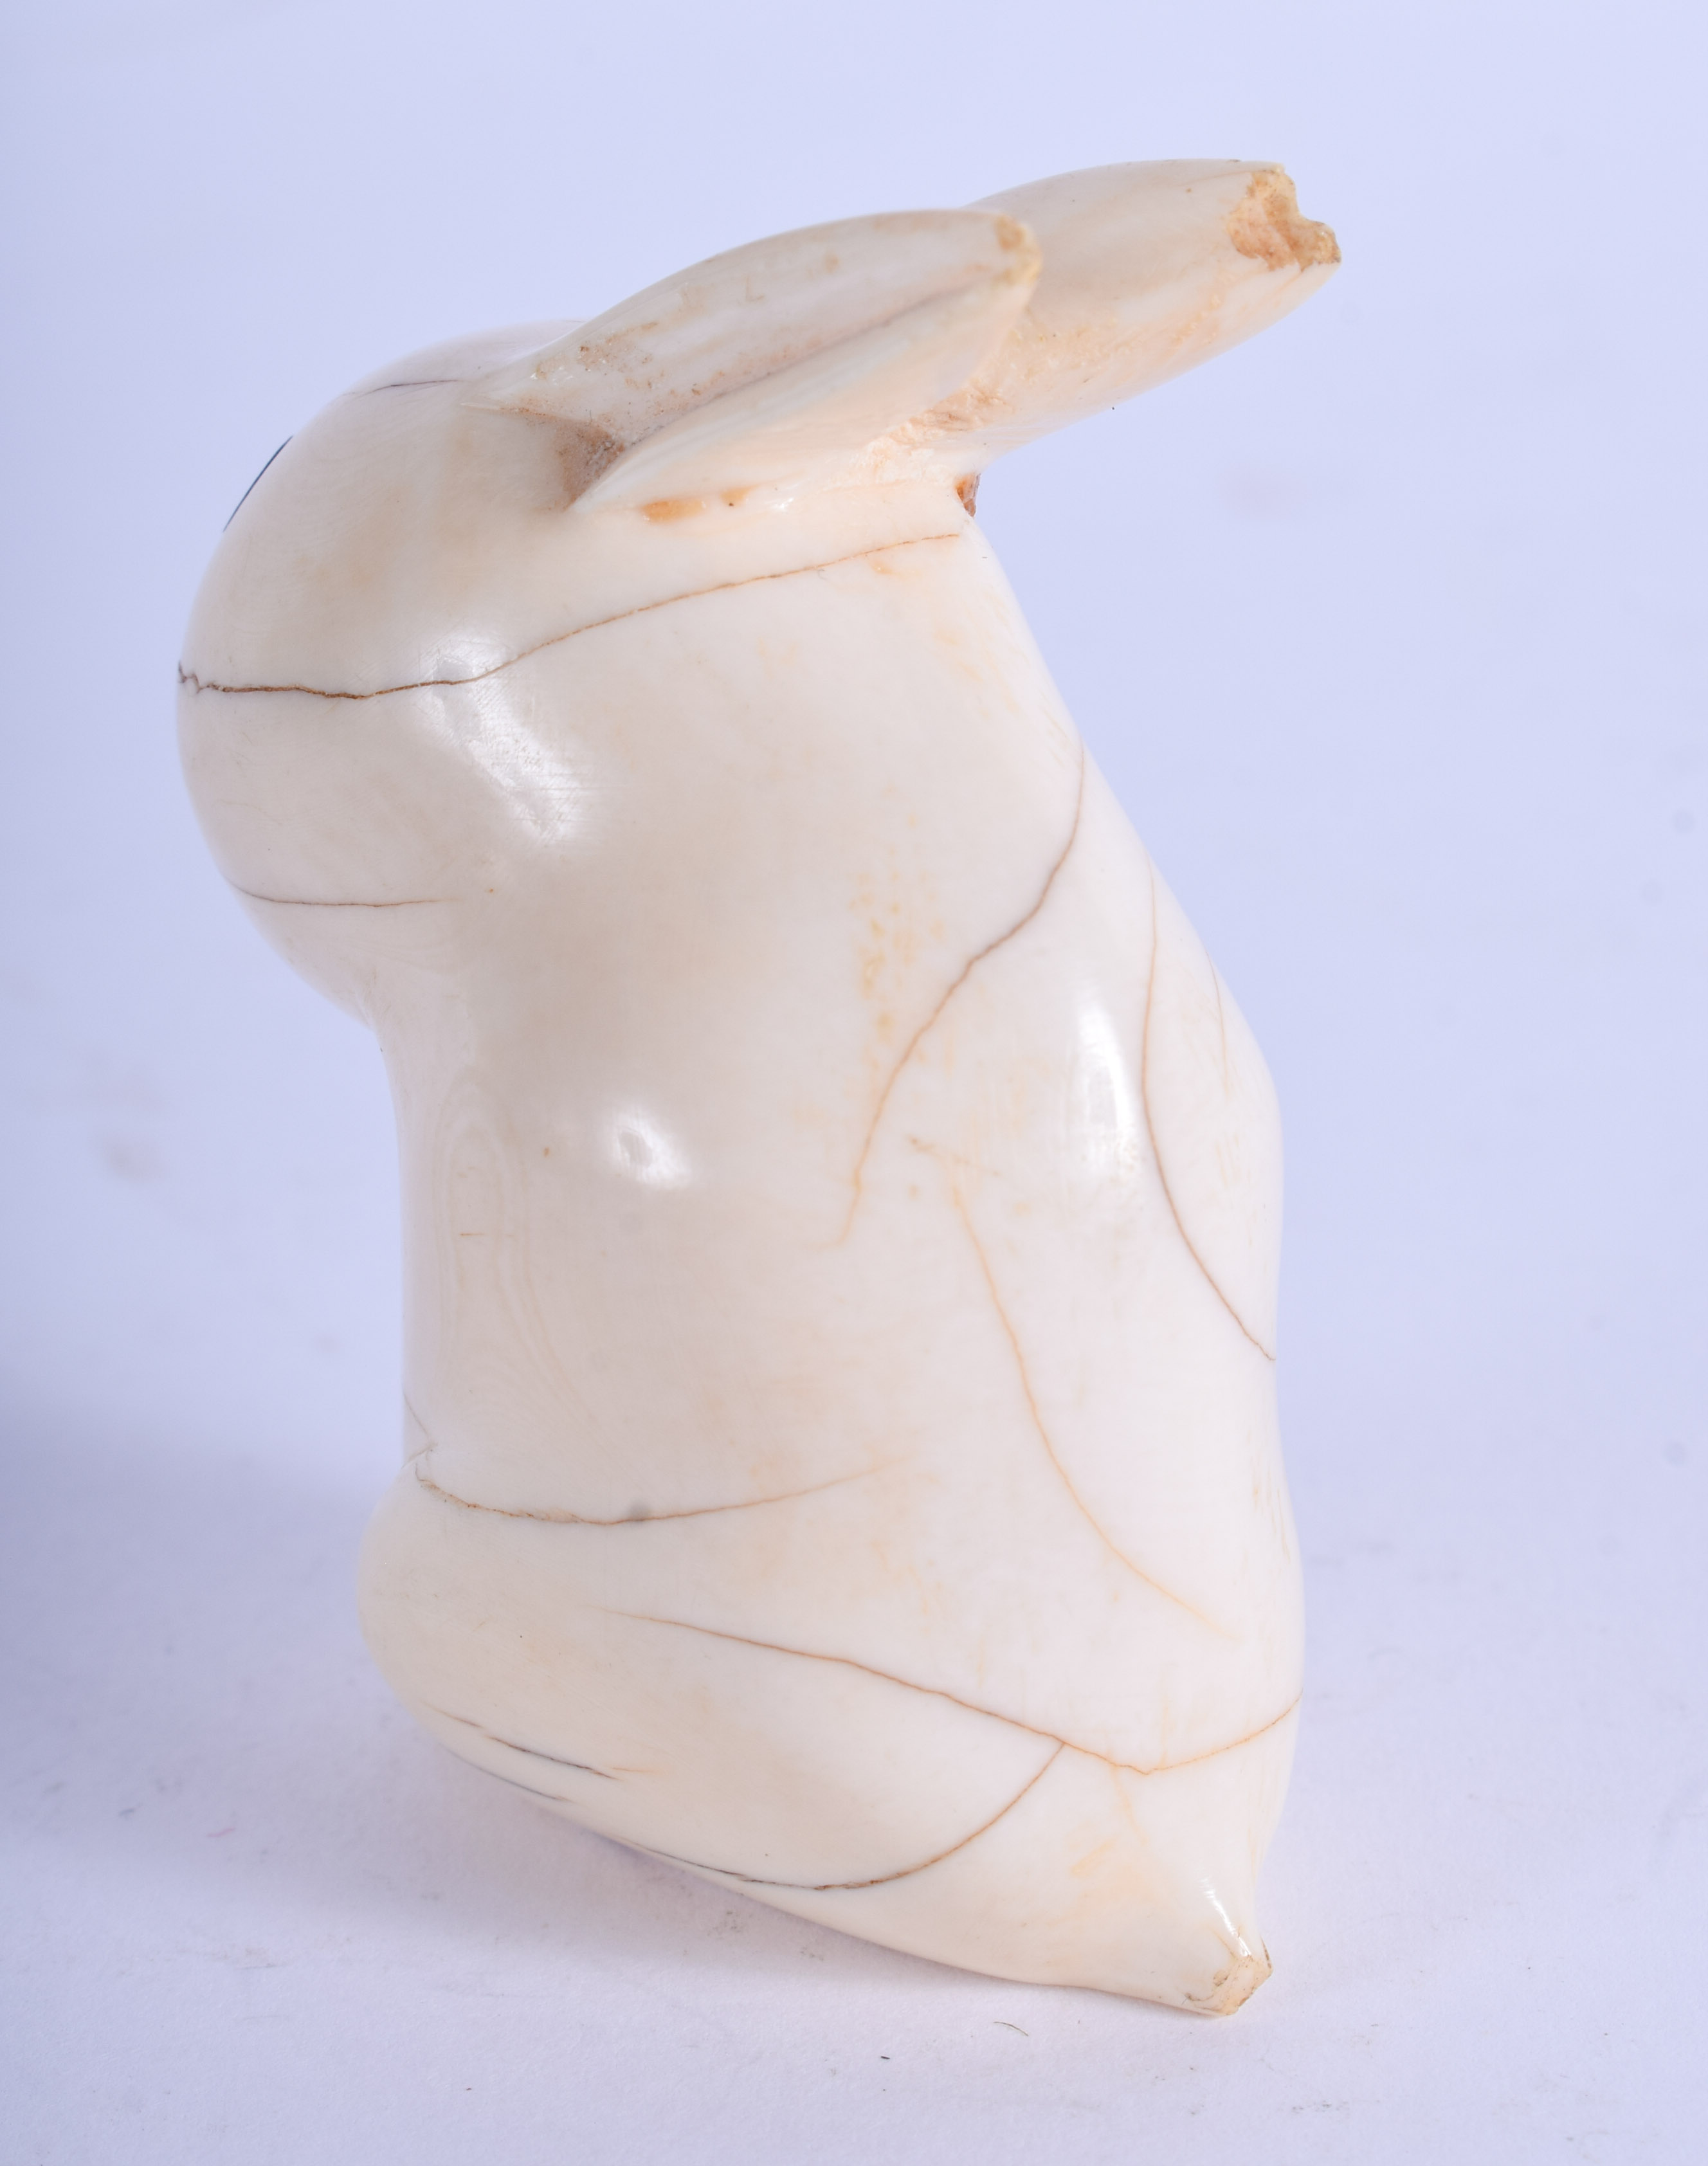 AN EARLY 20TH CENTURY JAPANESE MEIJI PERIOD CARVED IVORY RABBIT. 5.5 cm x 3.5 cm. - Image 2 of 3